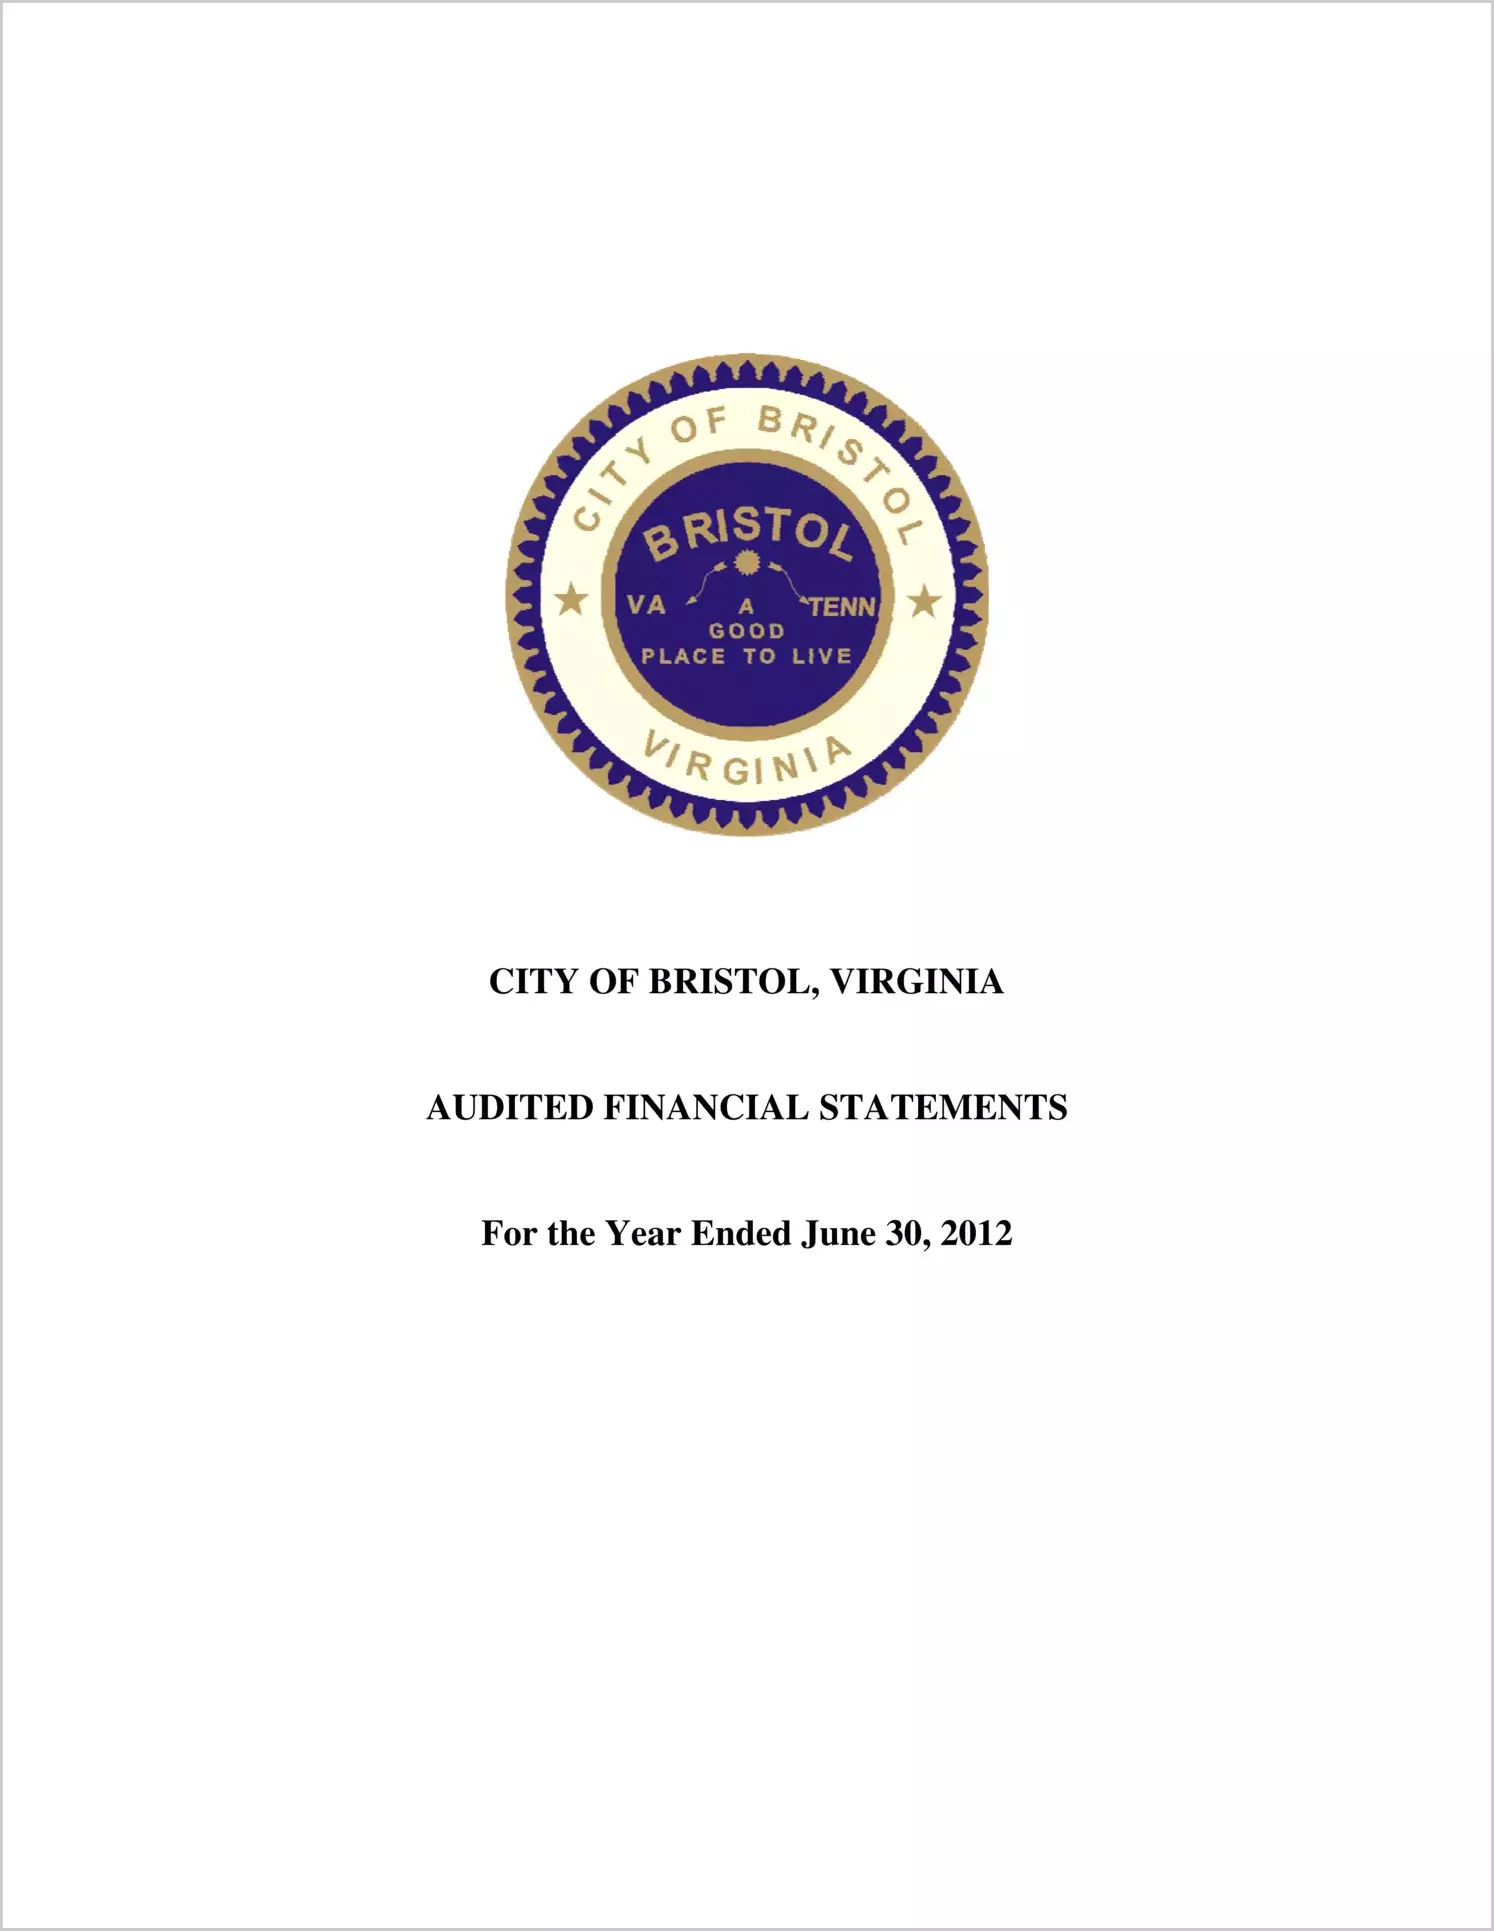 2012 Annual Financial Report for City of Bristol